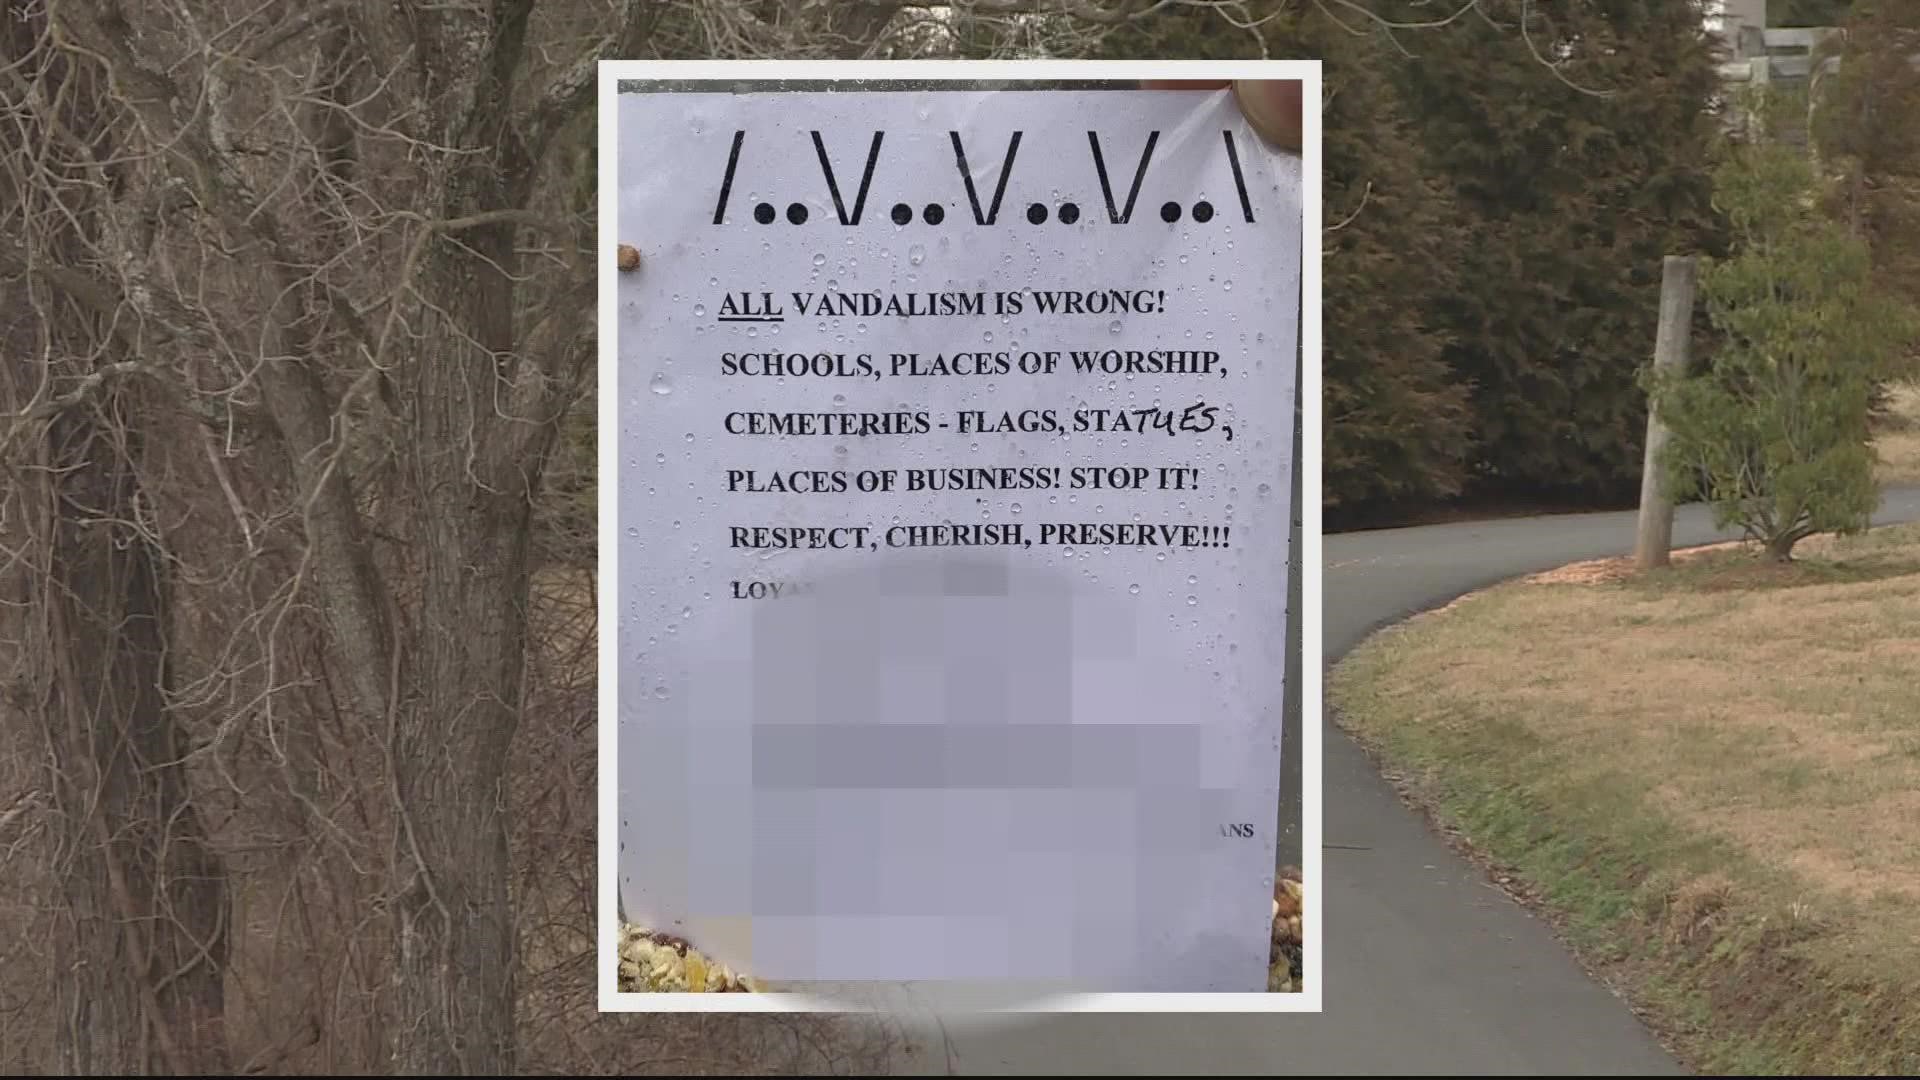 Who is leaving racist flyers in the driveways of many homes? The Loudoun County Sheriff's Office collected dozens of propaganda affiliated with the KKK this week.